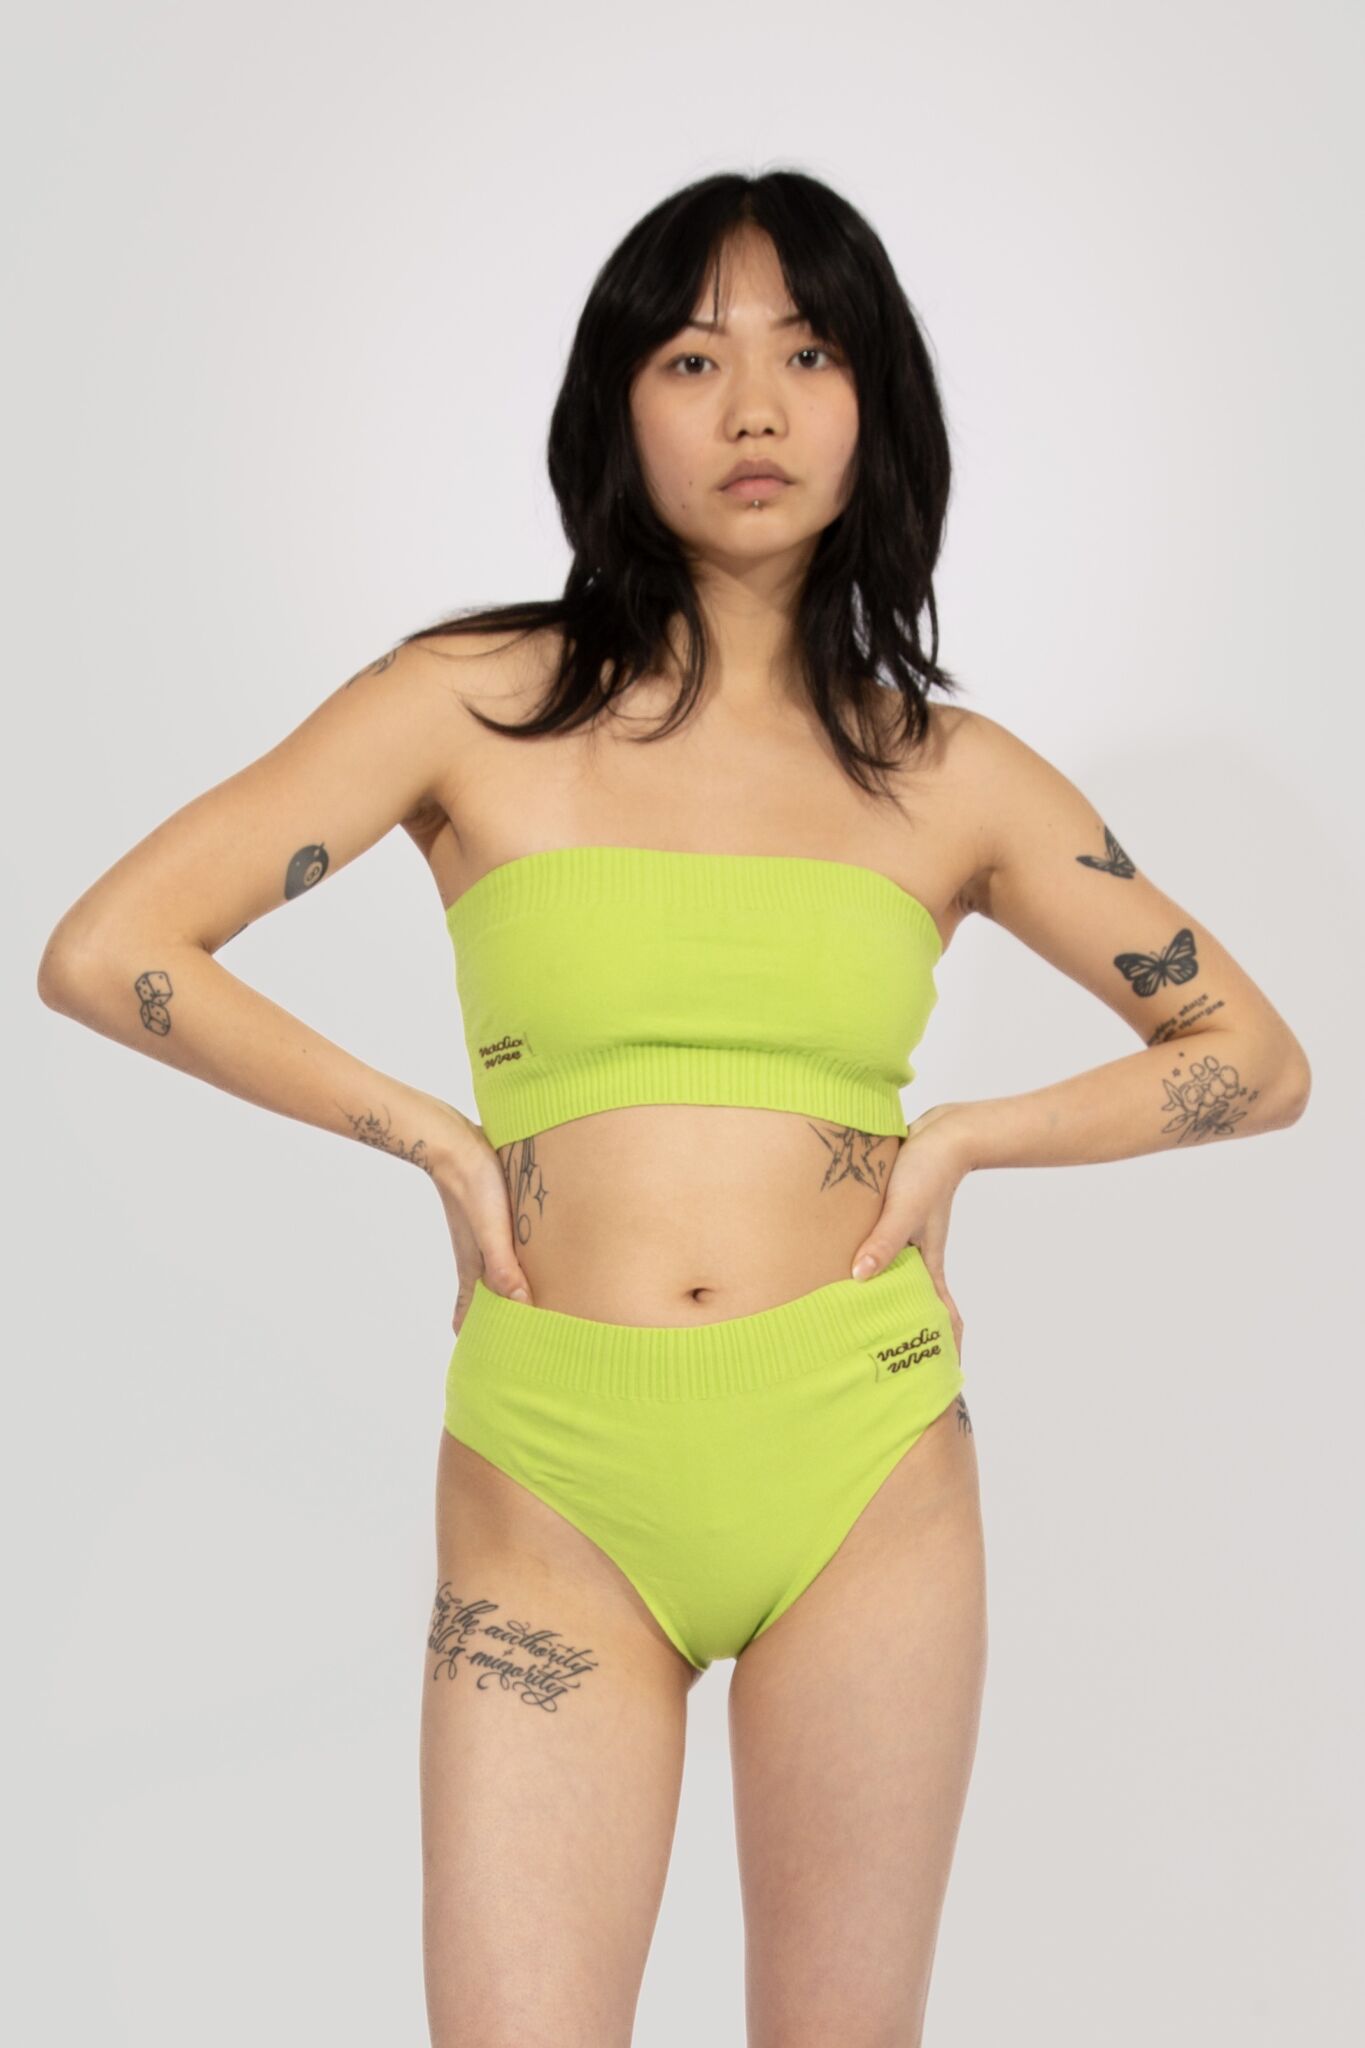 Bloomer top or Panty in lime, knitted pair of panties or top with logo